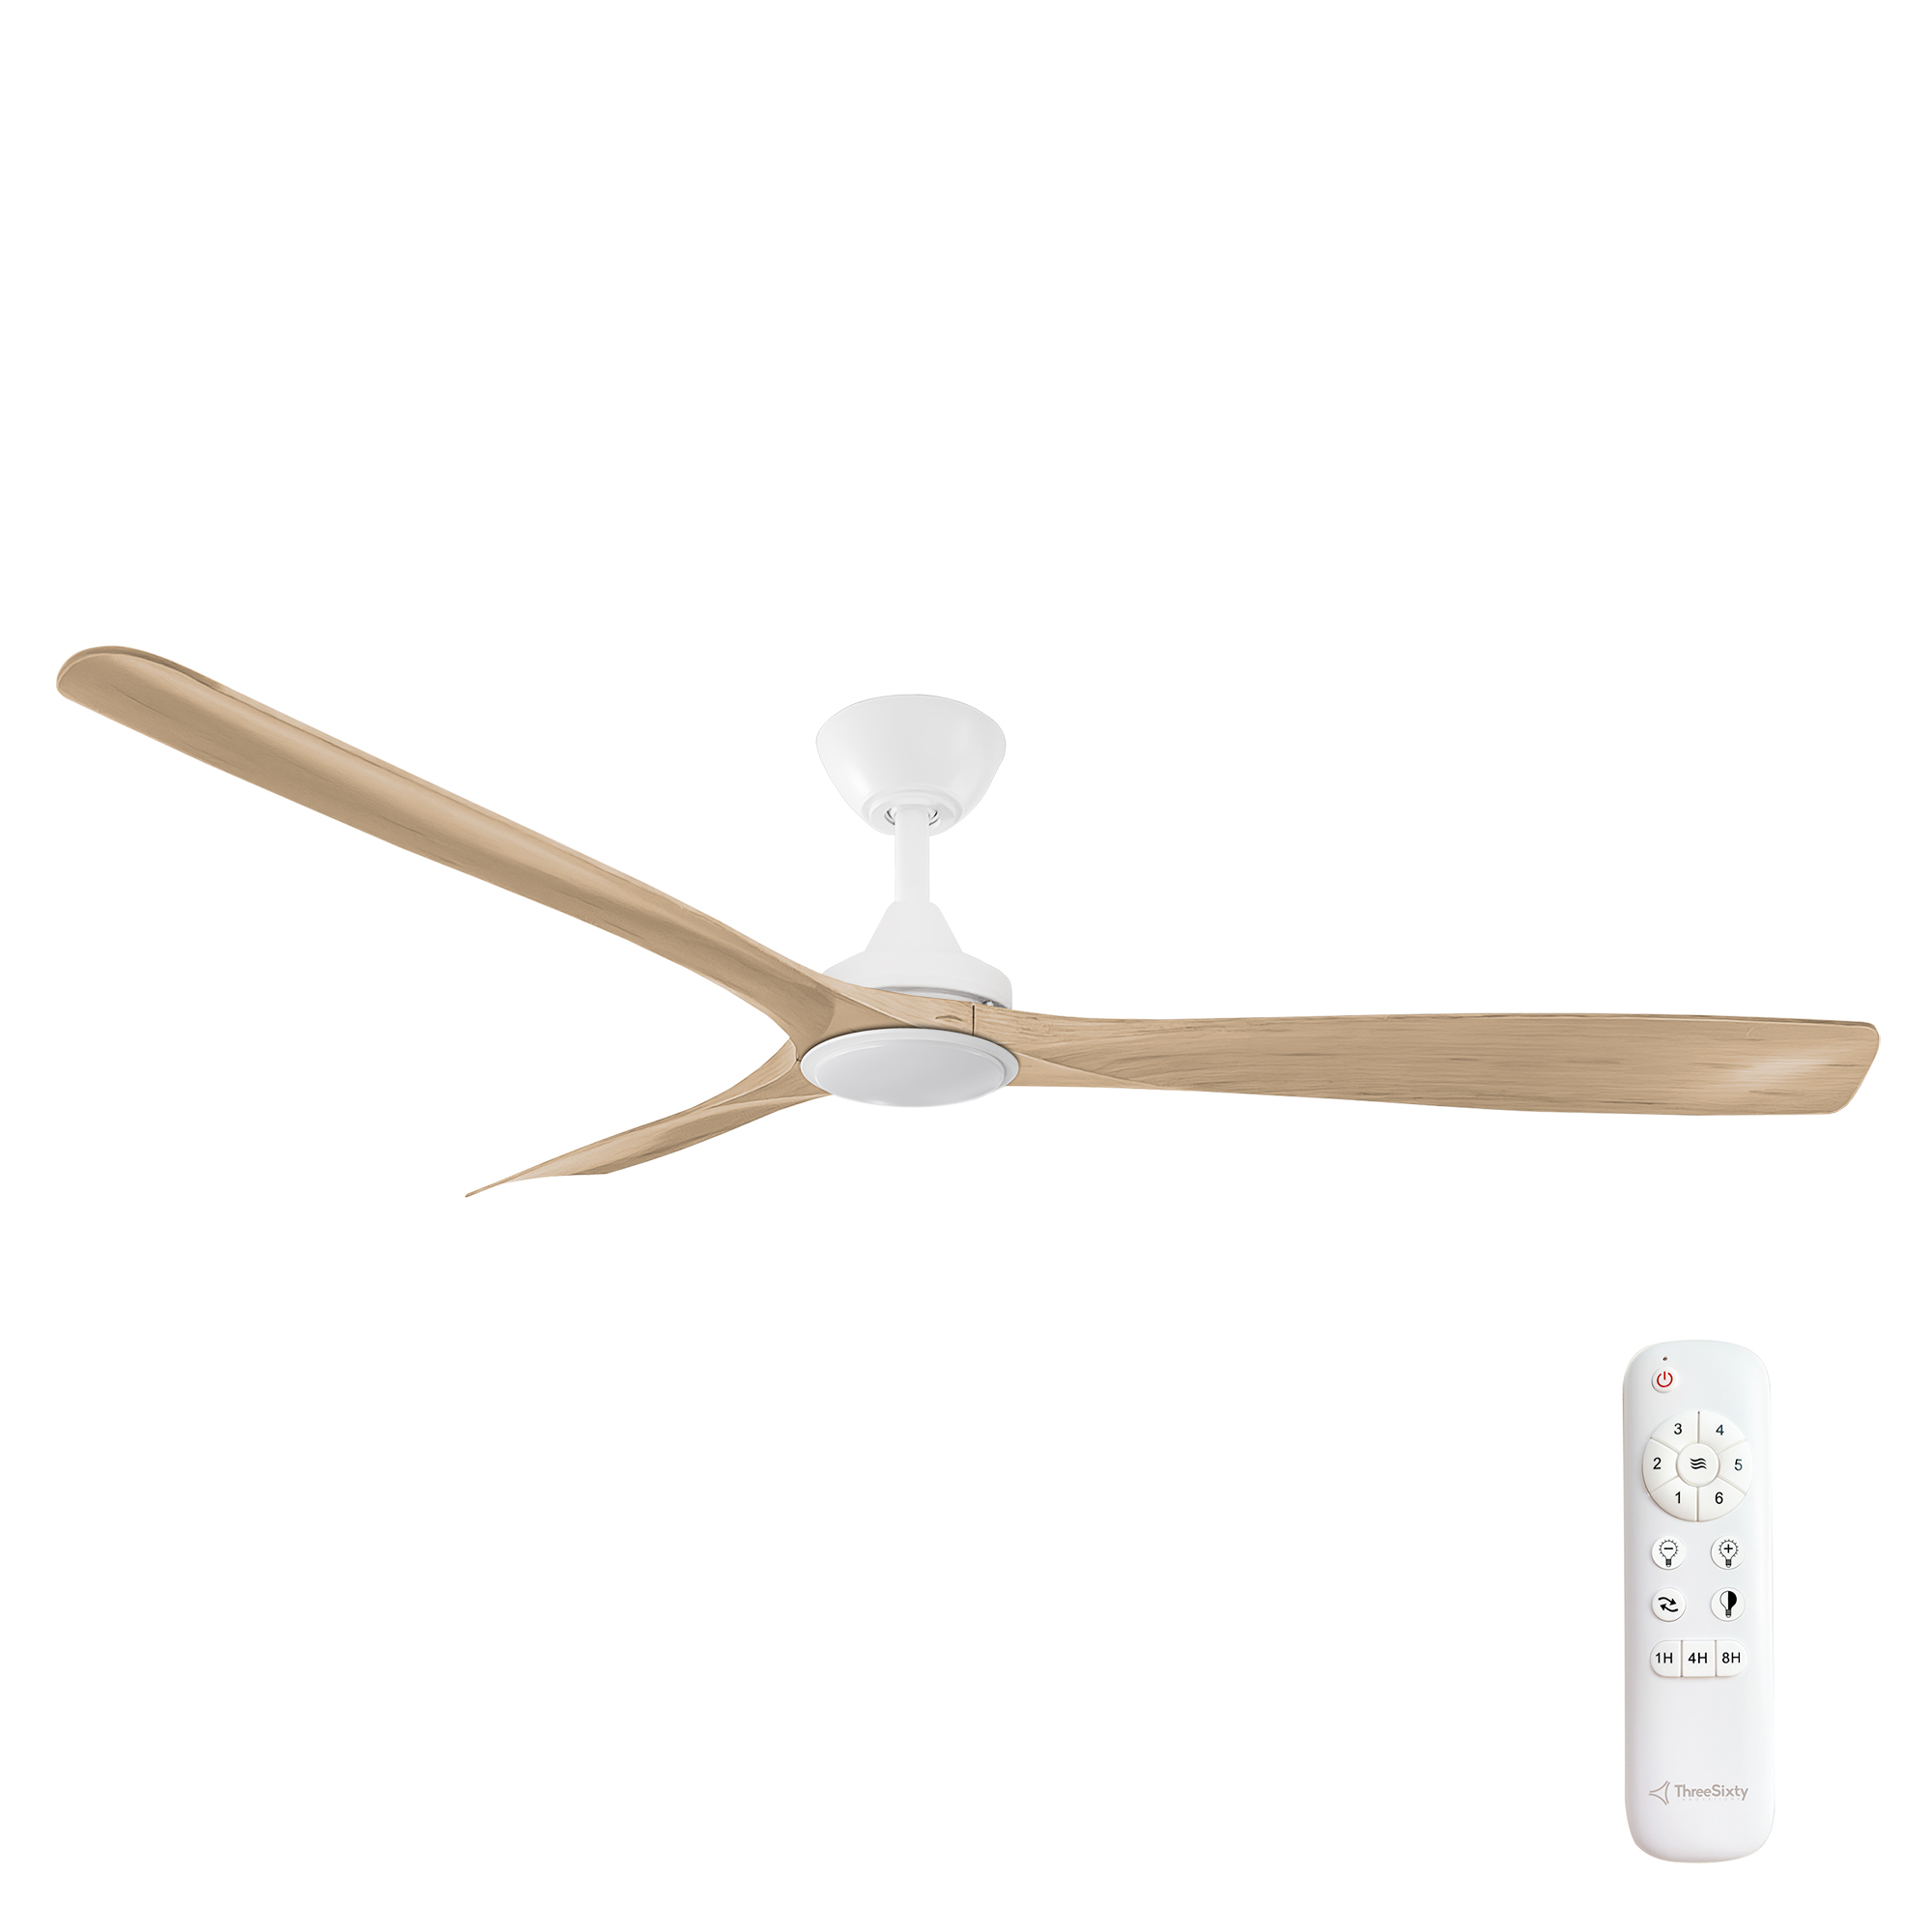 60" Spitfire DC Ceiling Fan in Matte White with Natural blades and 18W CCT LED Light